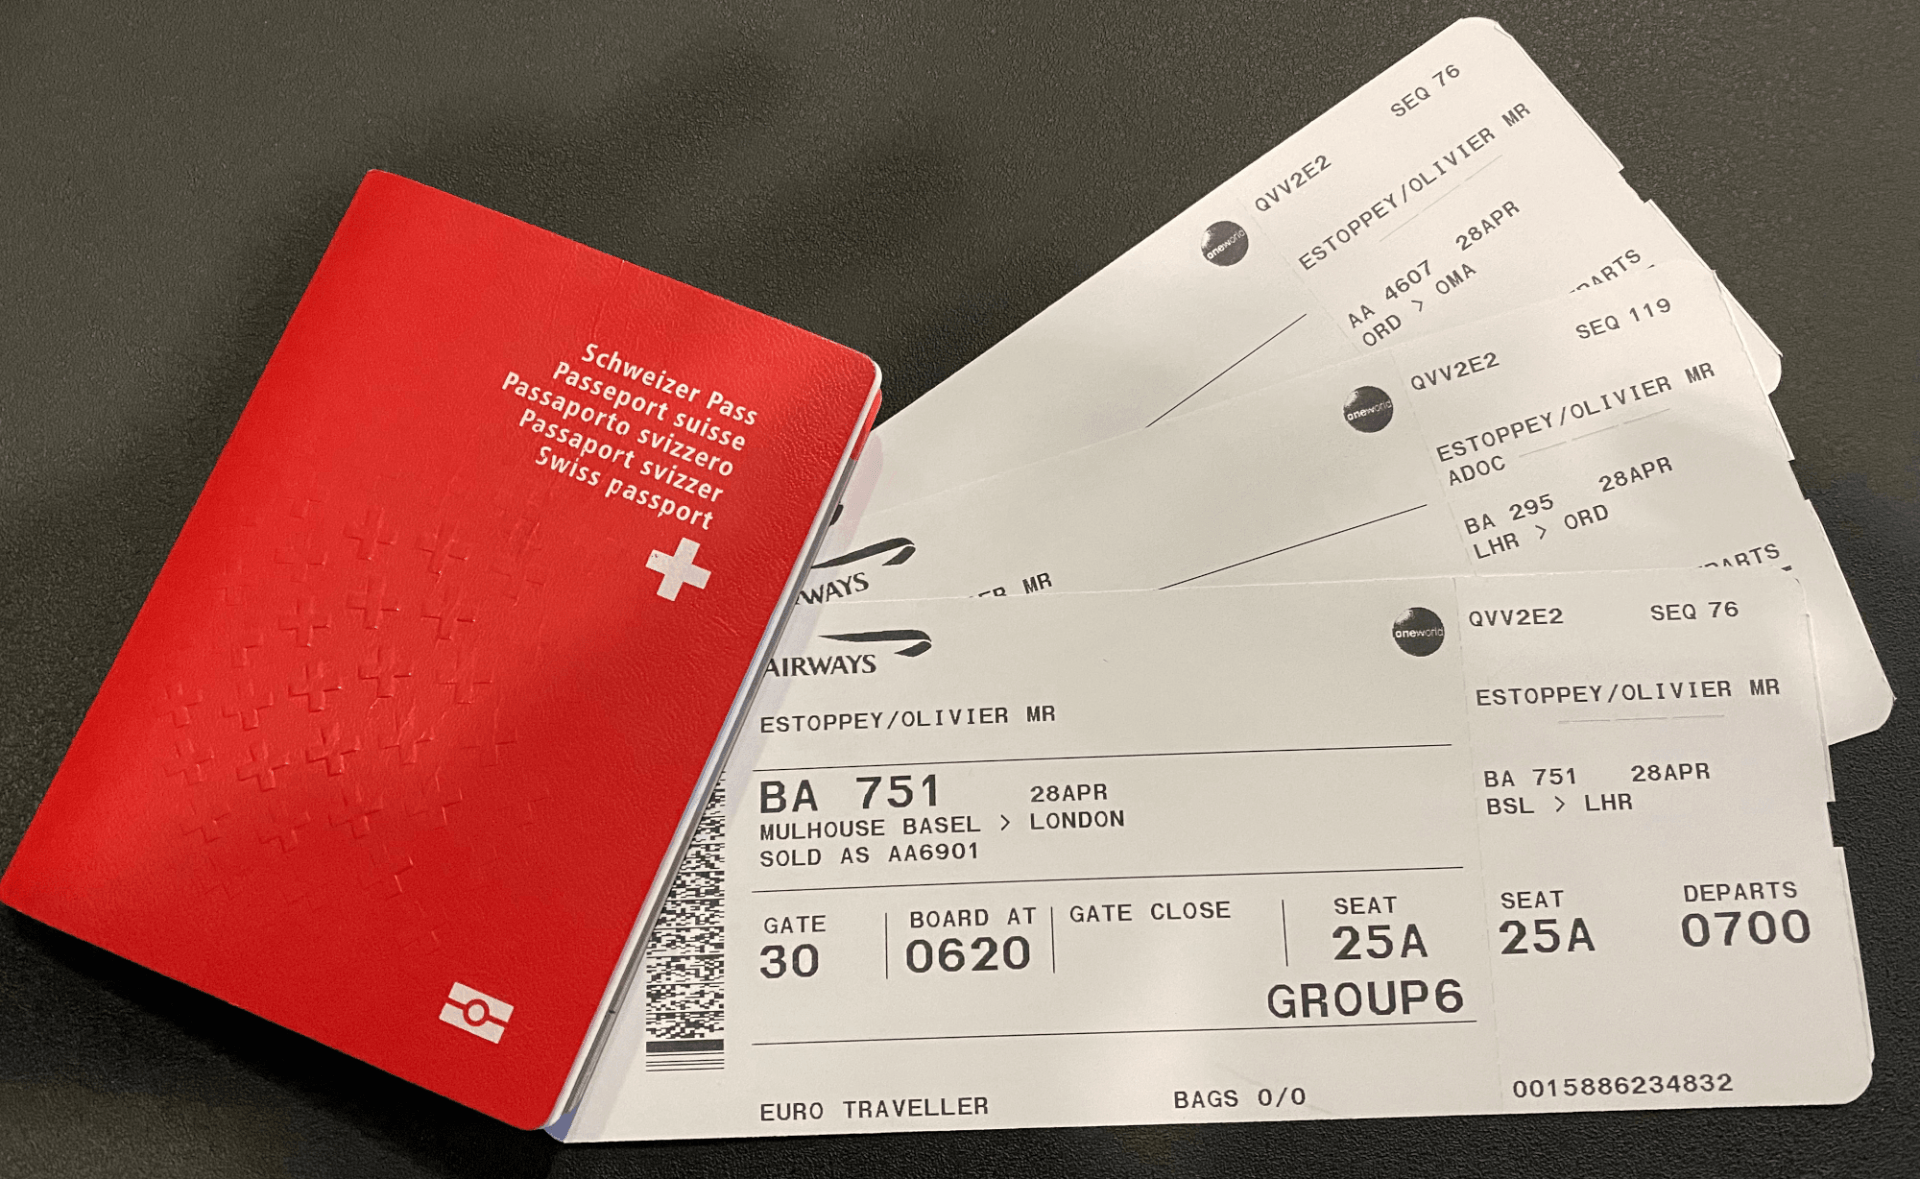 Swiss passport with plane tickets from Basel to London Heathrow, Chicago O'Hare and Omaha